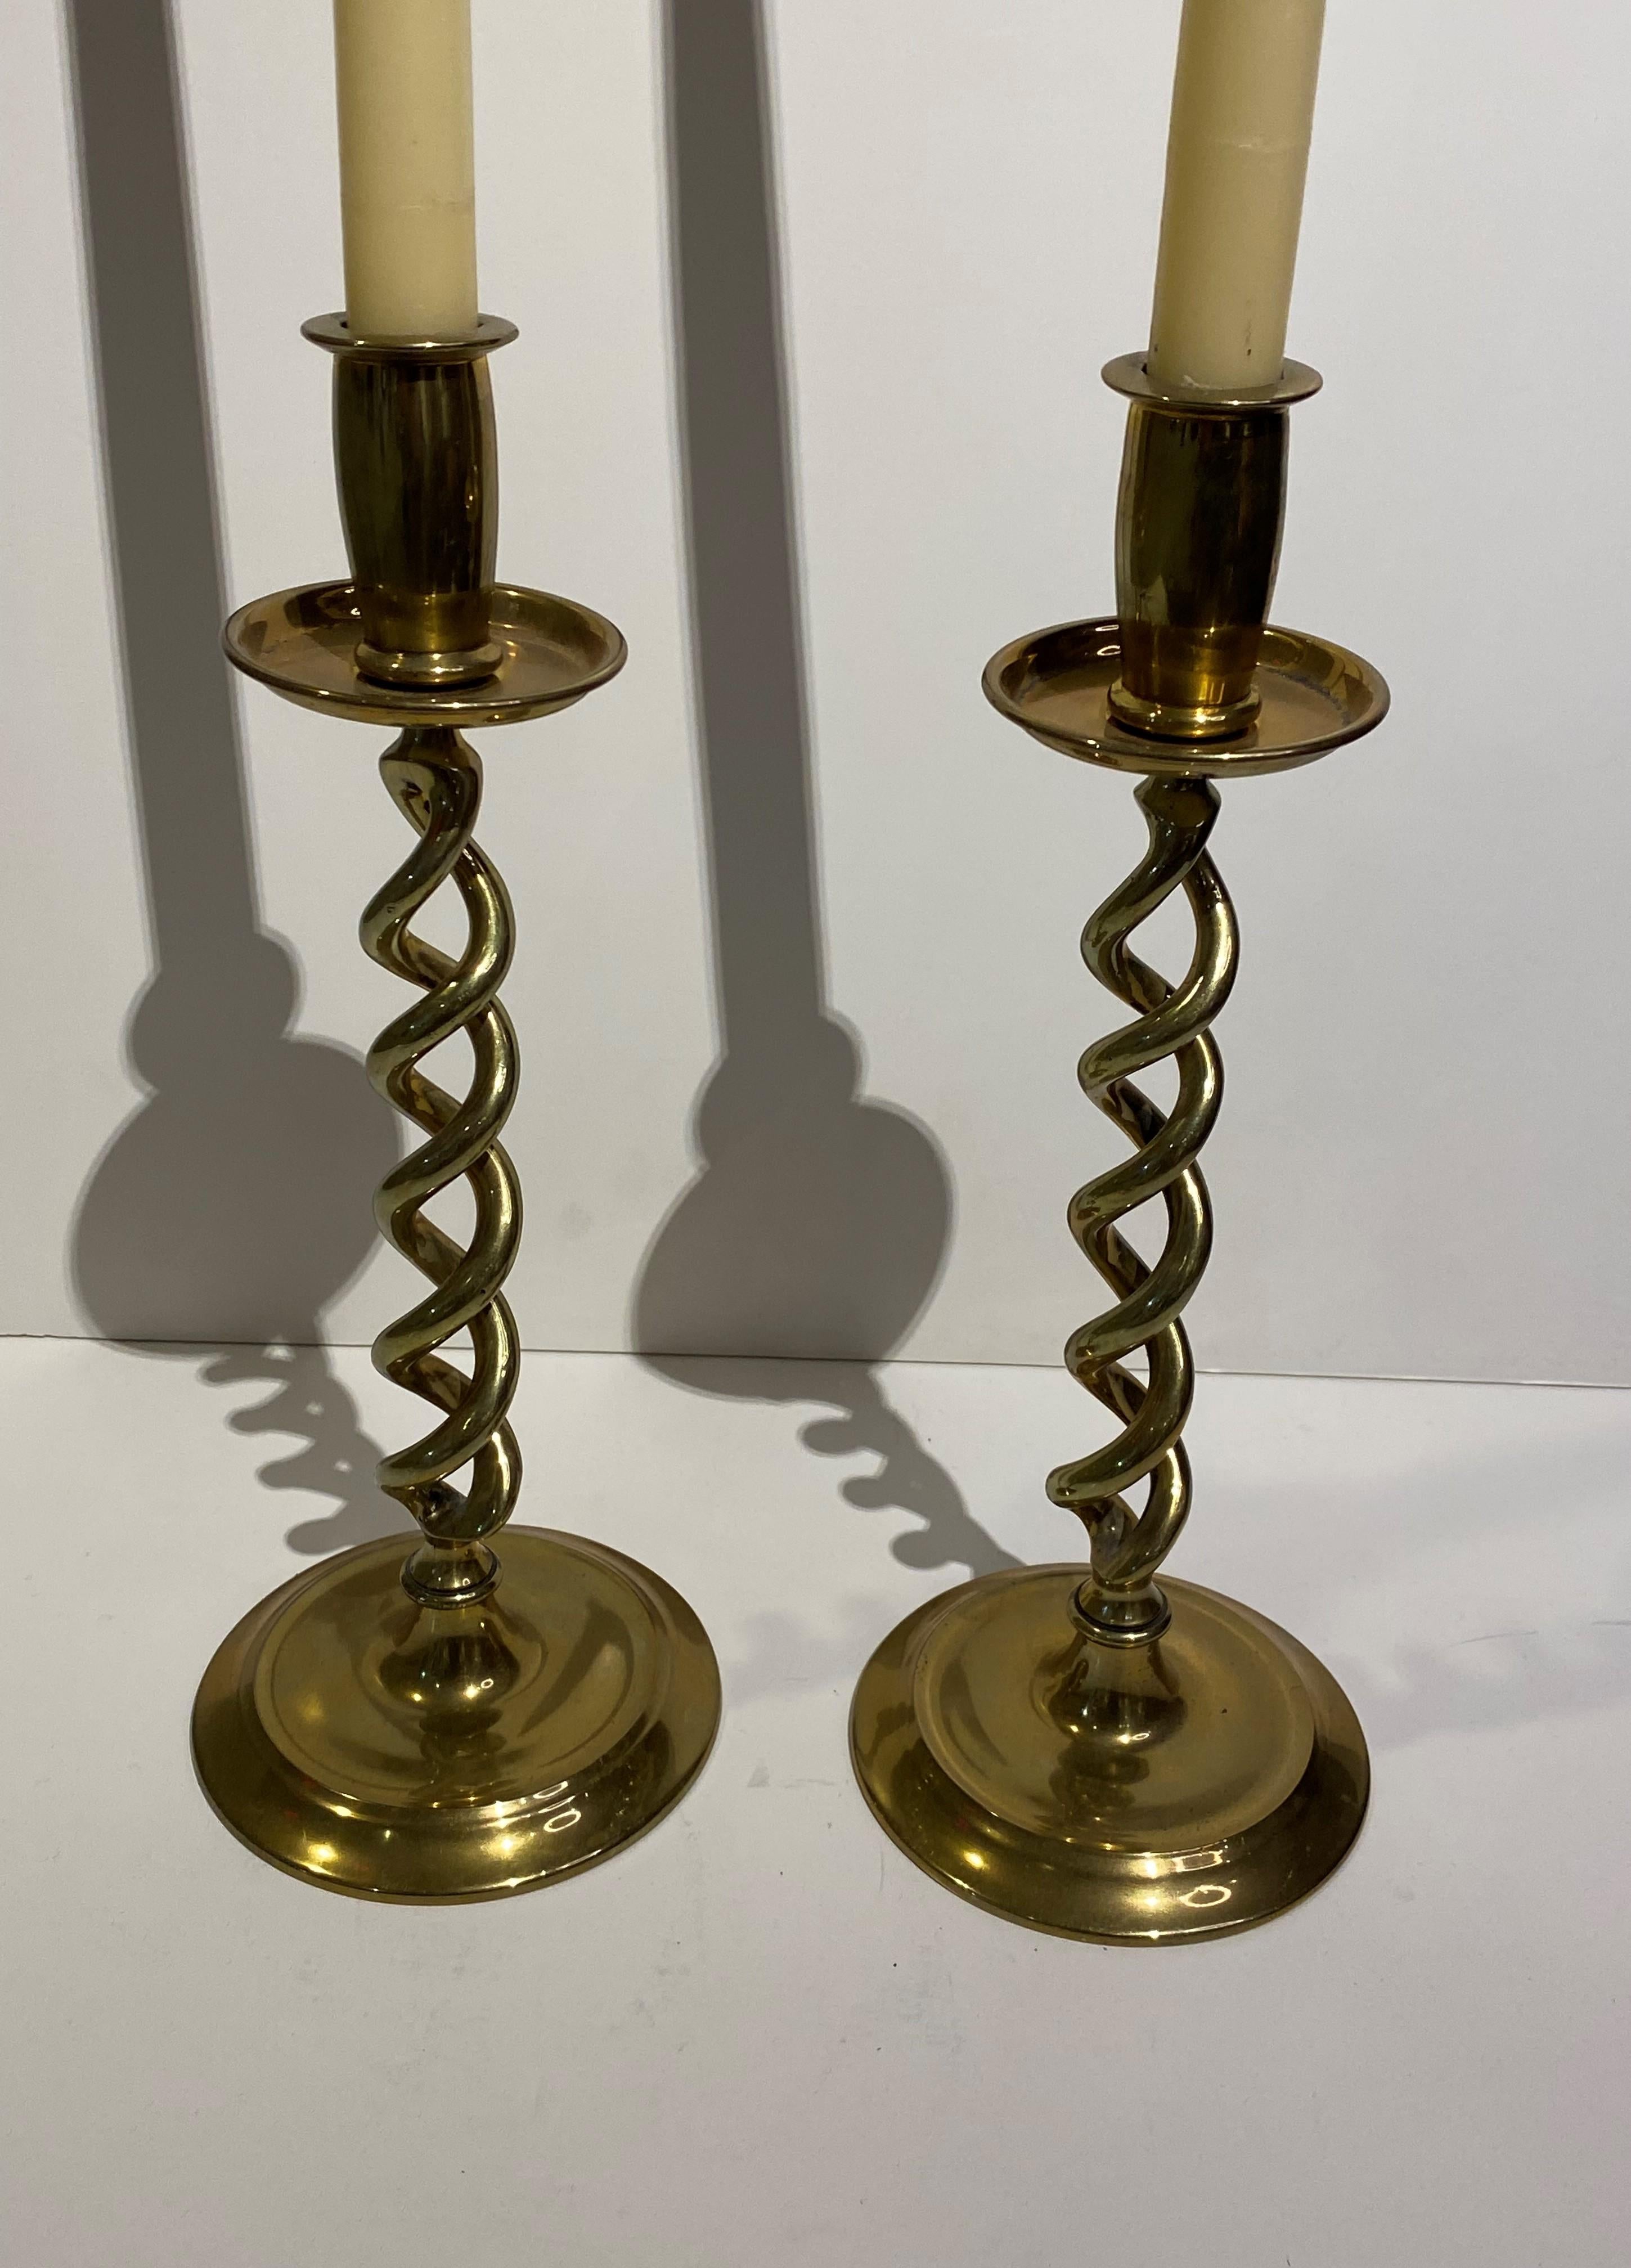 Pair of Old Open Twist Brass Candlesticks from England For Sale 2